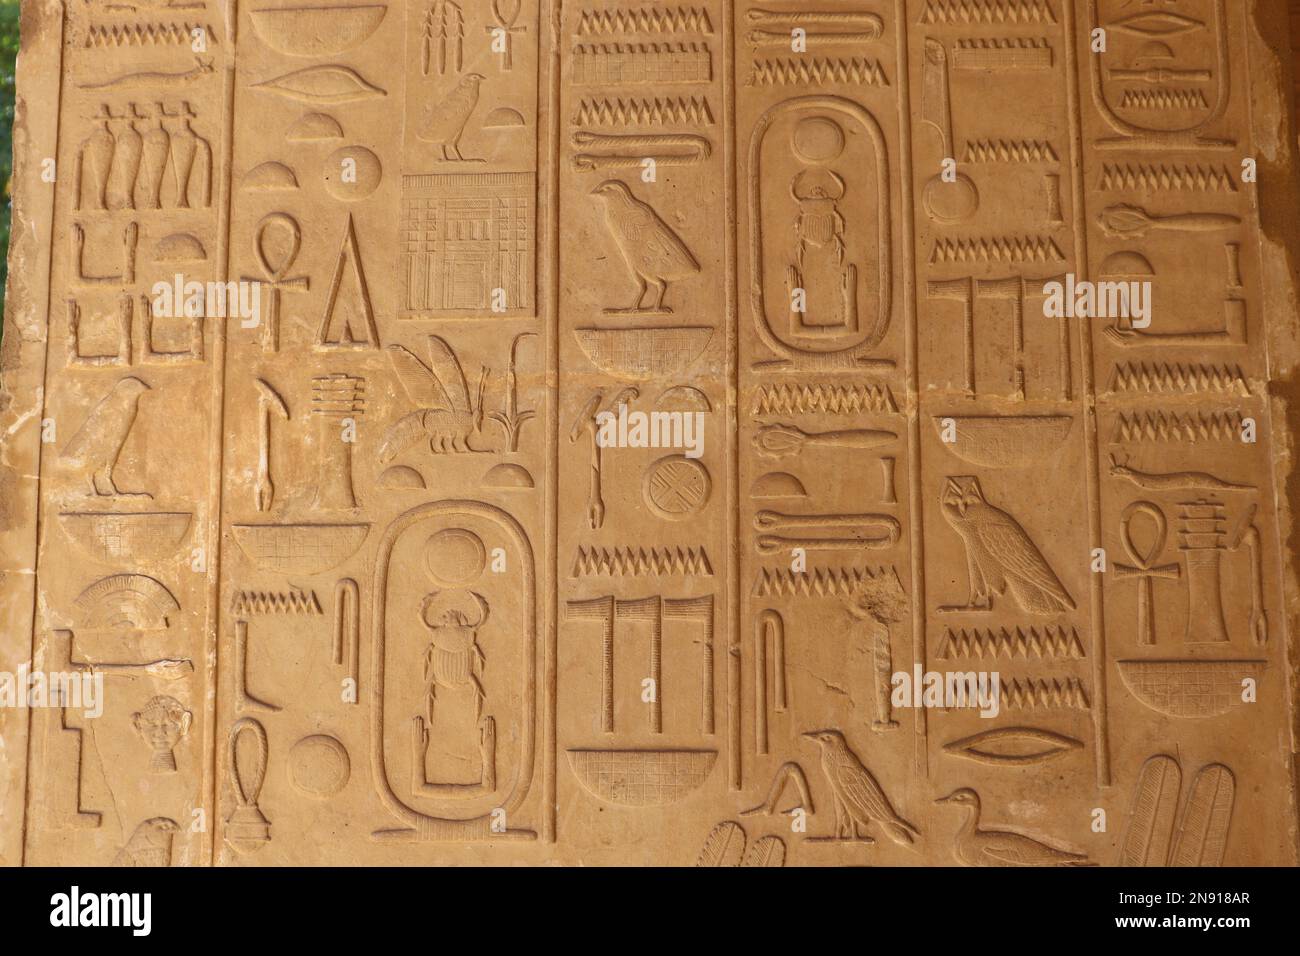 Ancient egyptian hieroglyphs carved on the walls of Karnak temple in Luxor, Egypt Stock Photo